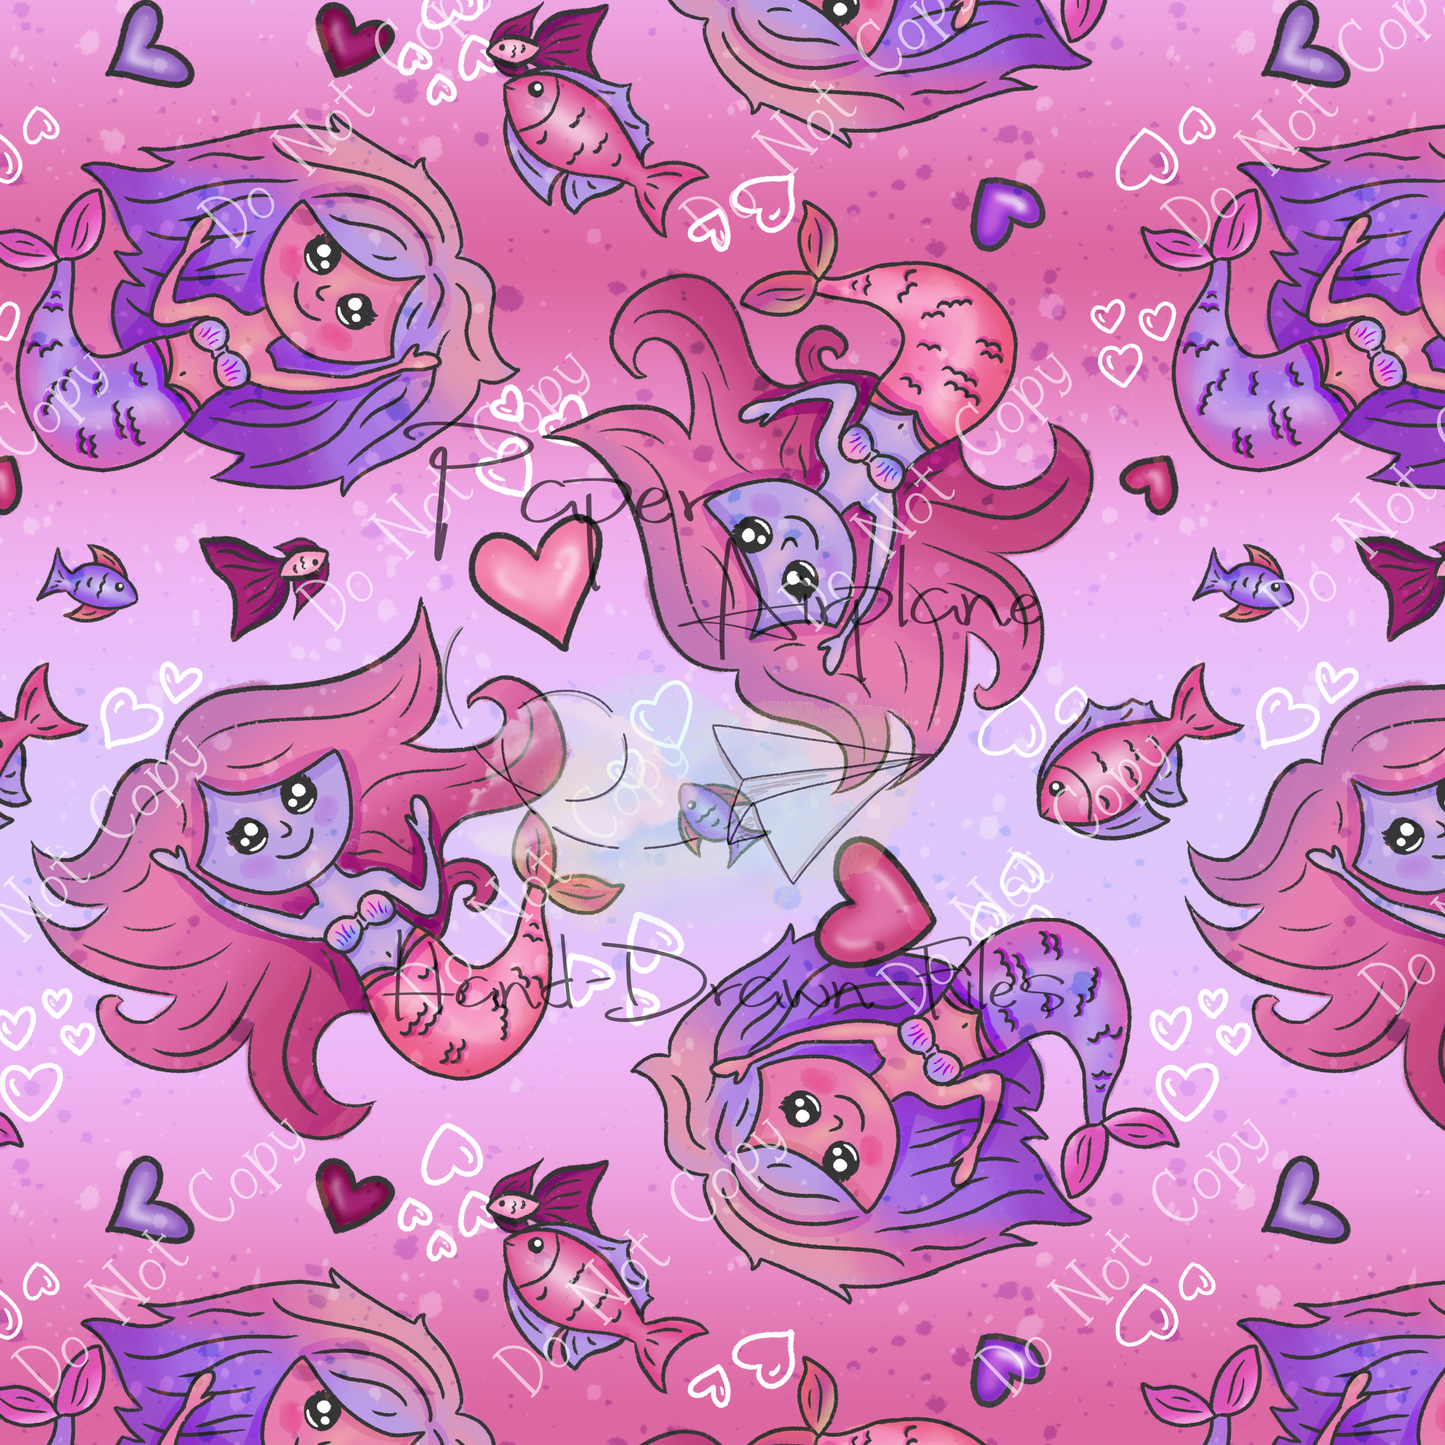 Swimming in Hearts